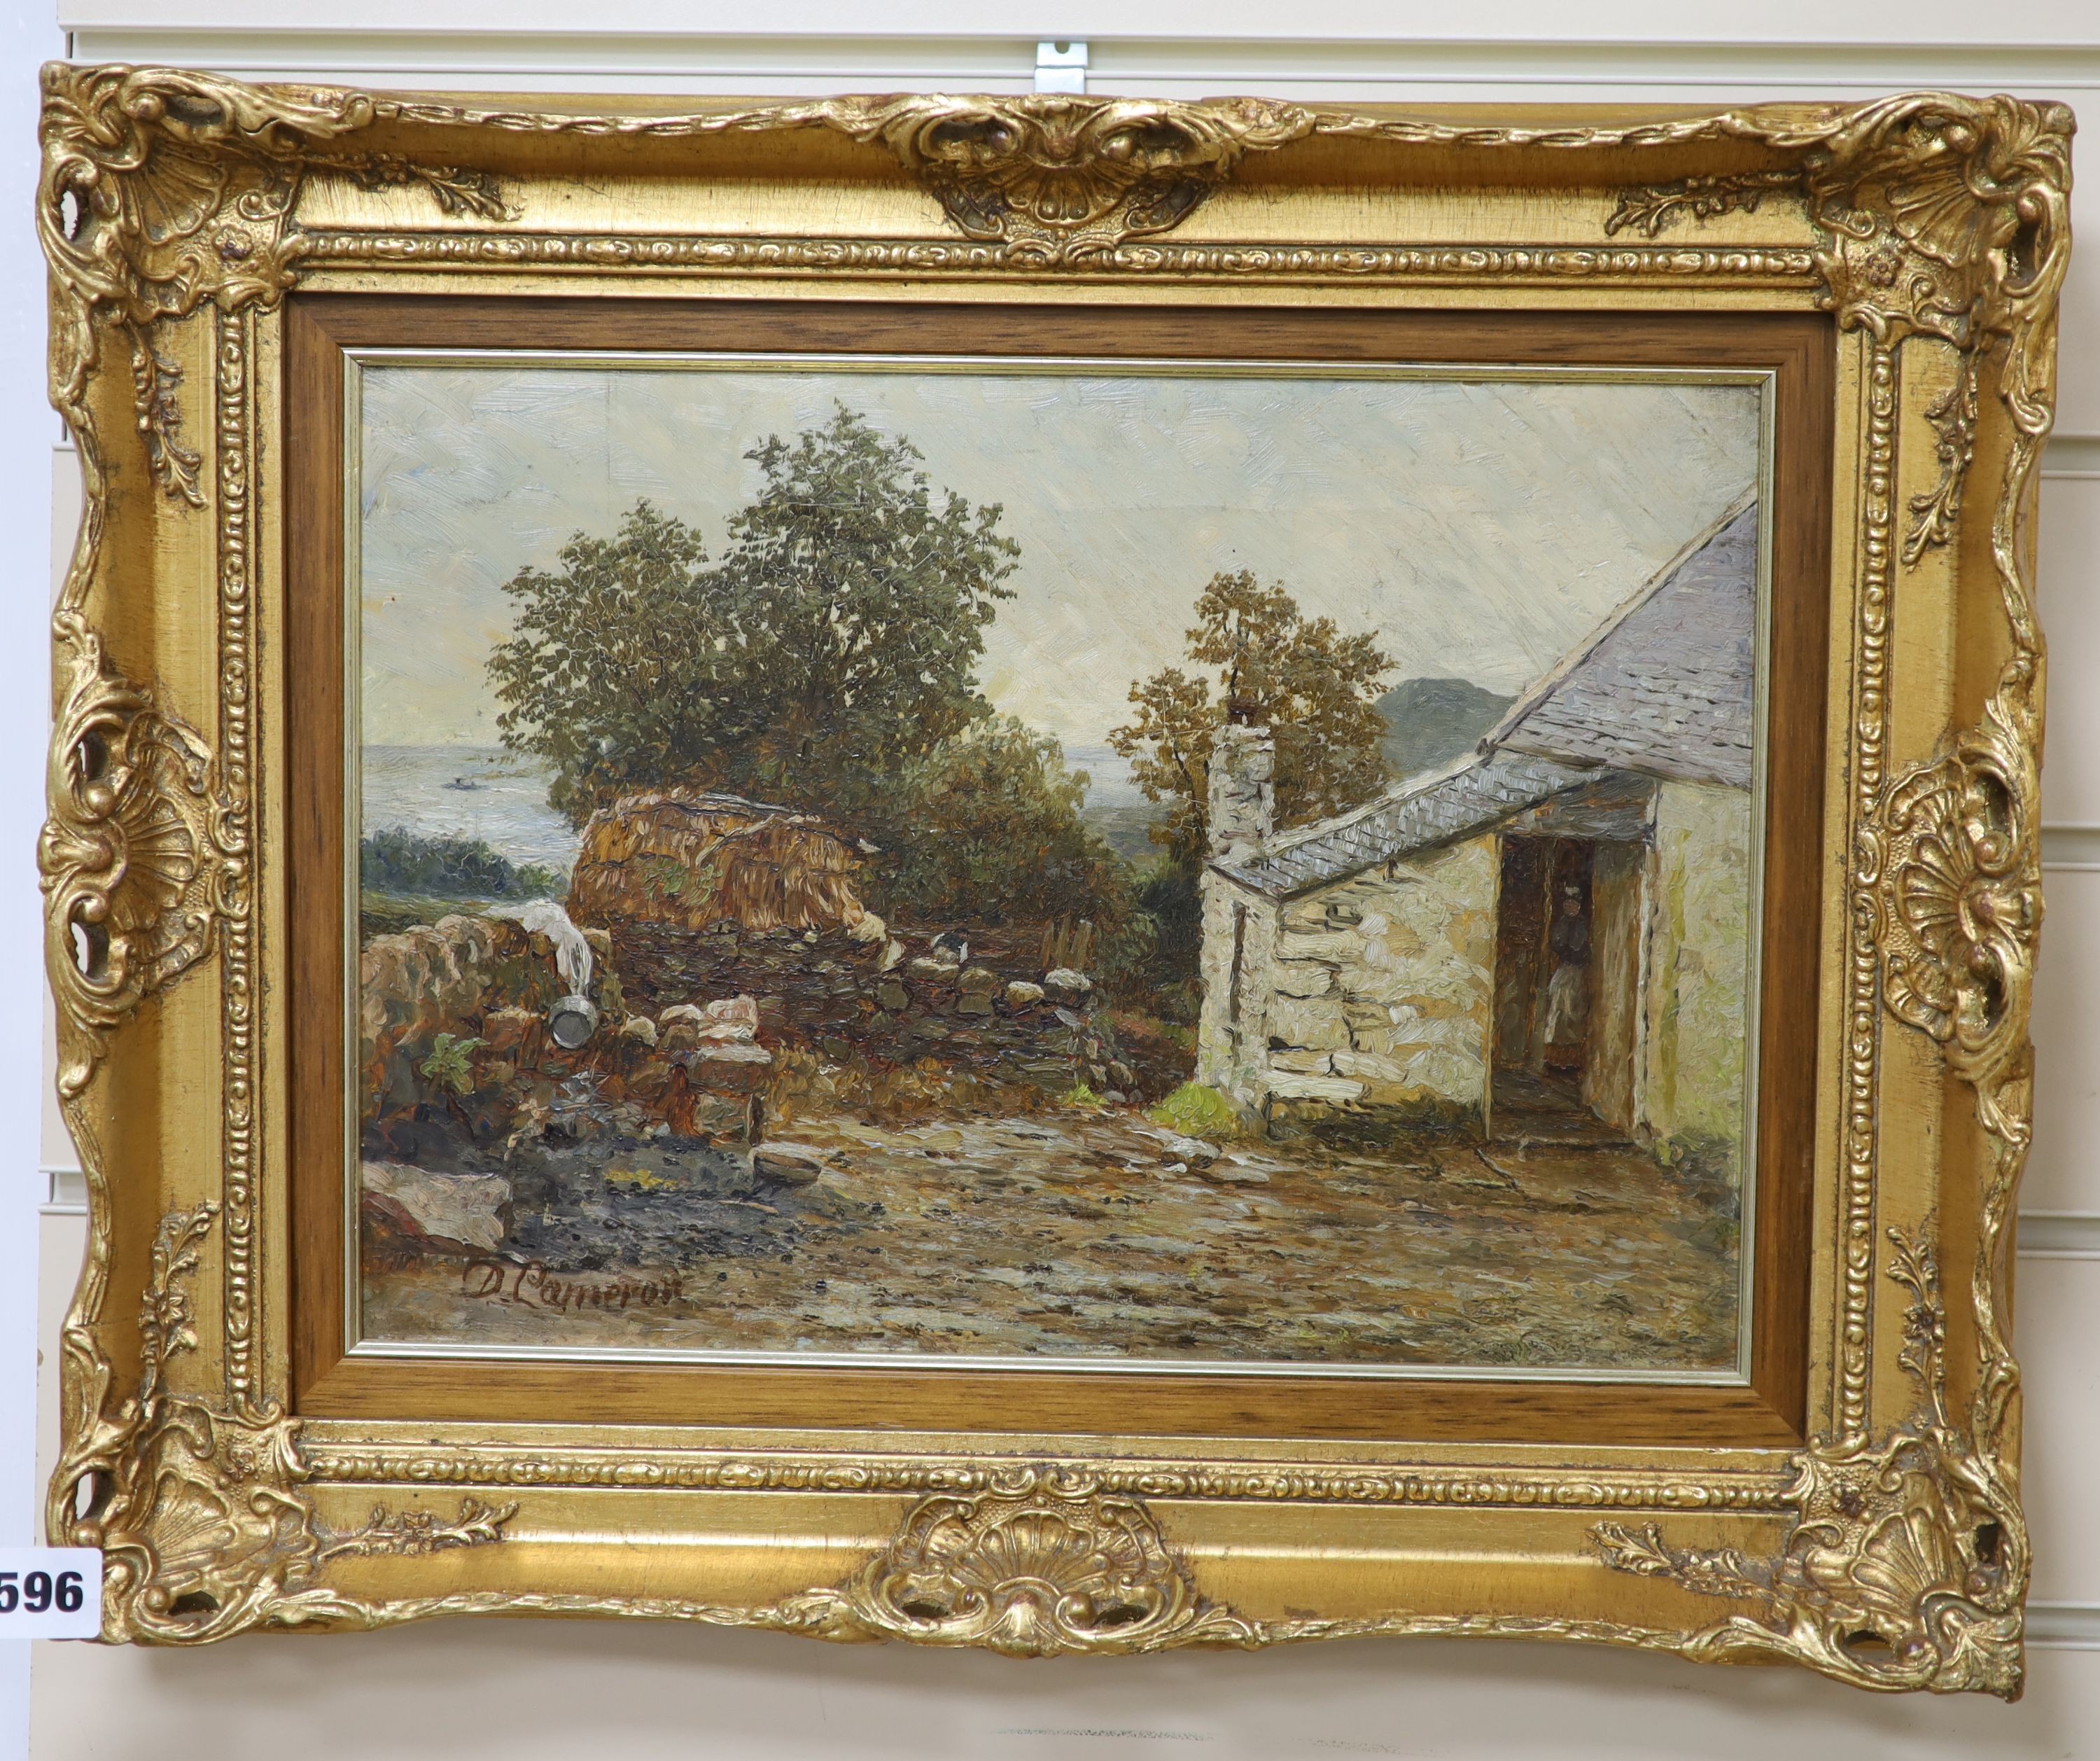 Duncan Cameron (1837-1916), oil on canvas, Study at a farm, signed and inscribed verso, 26 x 36cm - Image 2 of 3